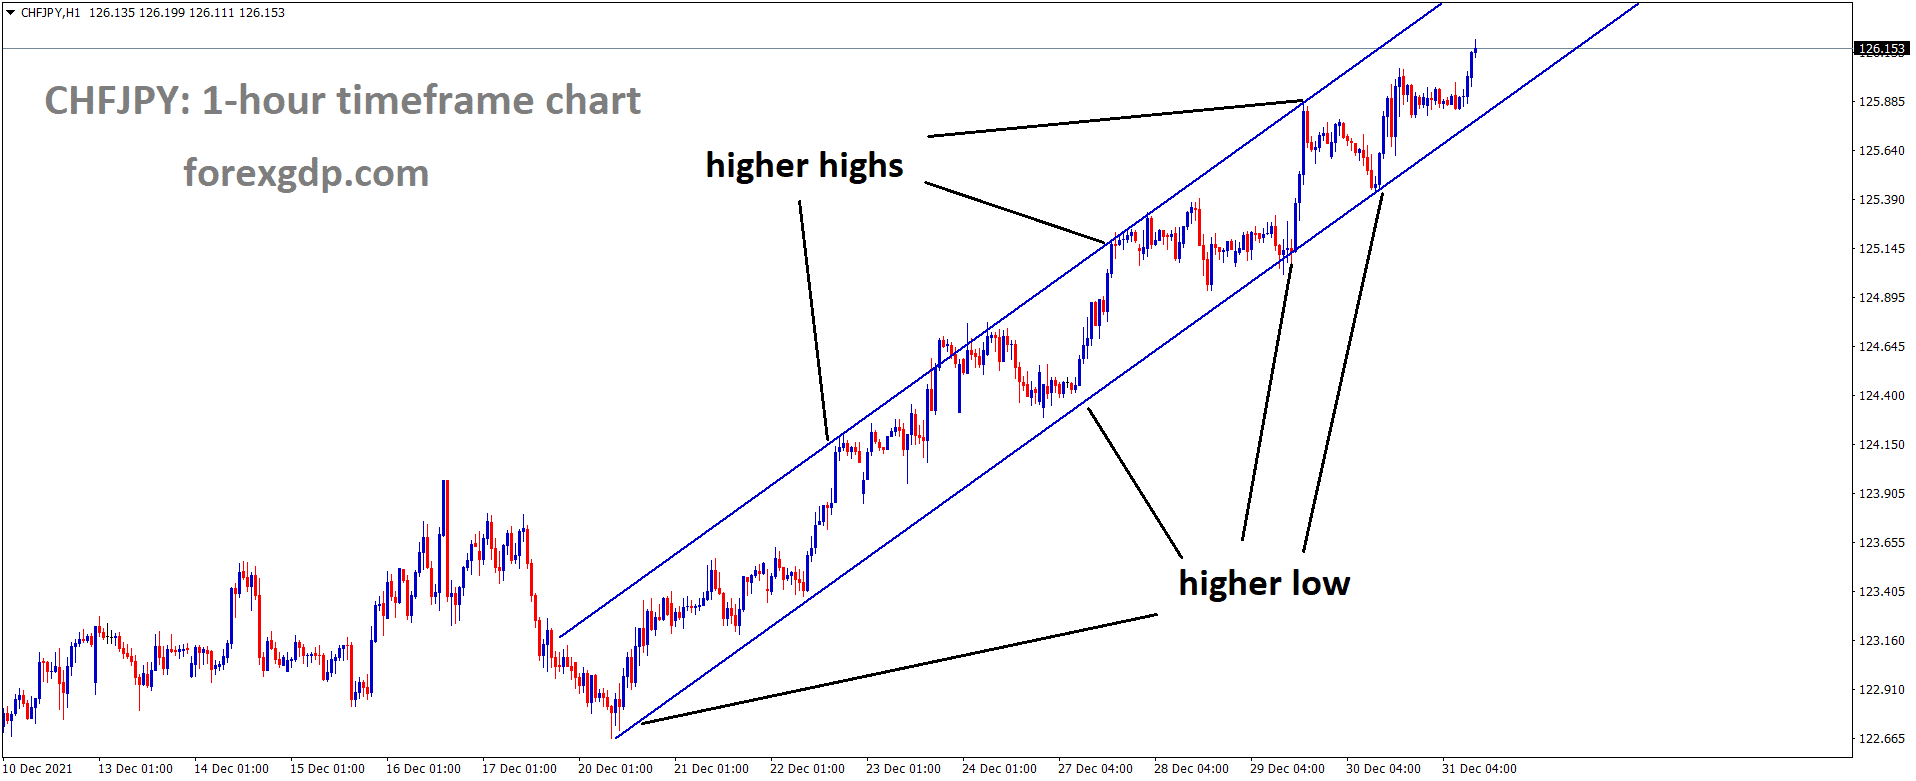 CHFJPY is moving in an Ascending channel and the market has rebounded from the higher low area of the channel